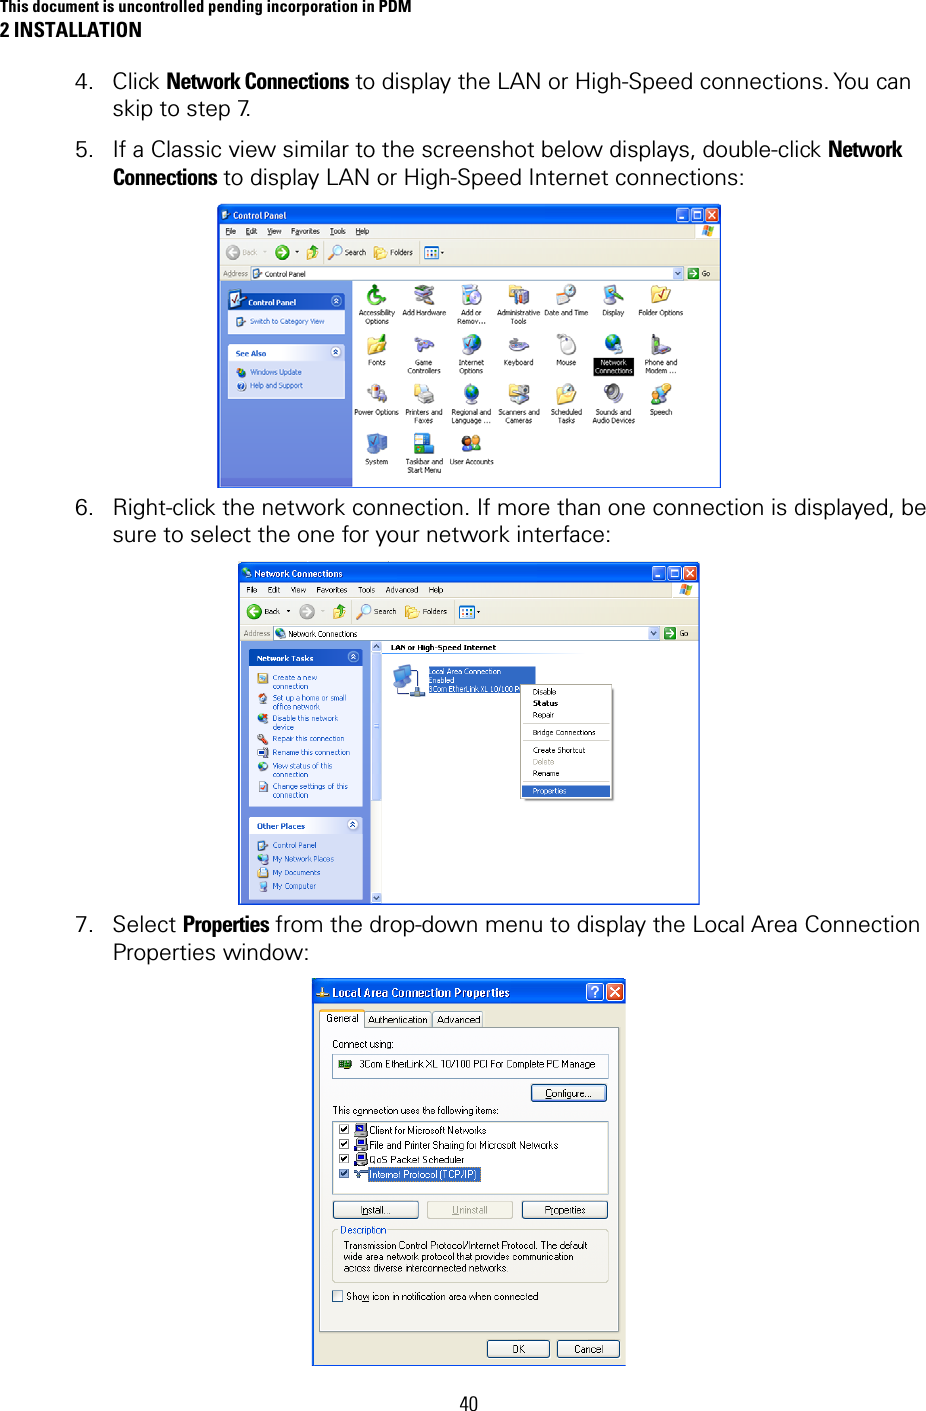 This document is uncontrolled pending incorporation in PDM 2 INSTALLATION 40 4. Click Network Connections to display the LAN or High-Speed connections. You can skip to step 7.  5. If a Classic view similar to the screenshot below displays, double-click Network Connections to display LAN or High-Speed Internet connections:  6. Right-click the network connection. If more than one connection is displayed, be sure to select the one for your network interface:  7. Select Properties from the drop-down menu to display the Local Area Connection Properties window:  